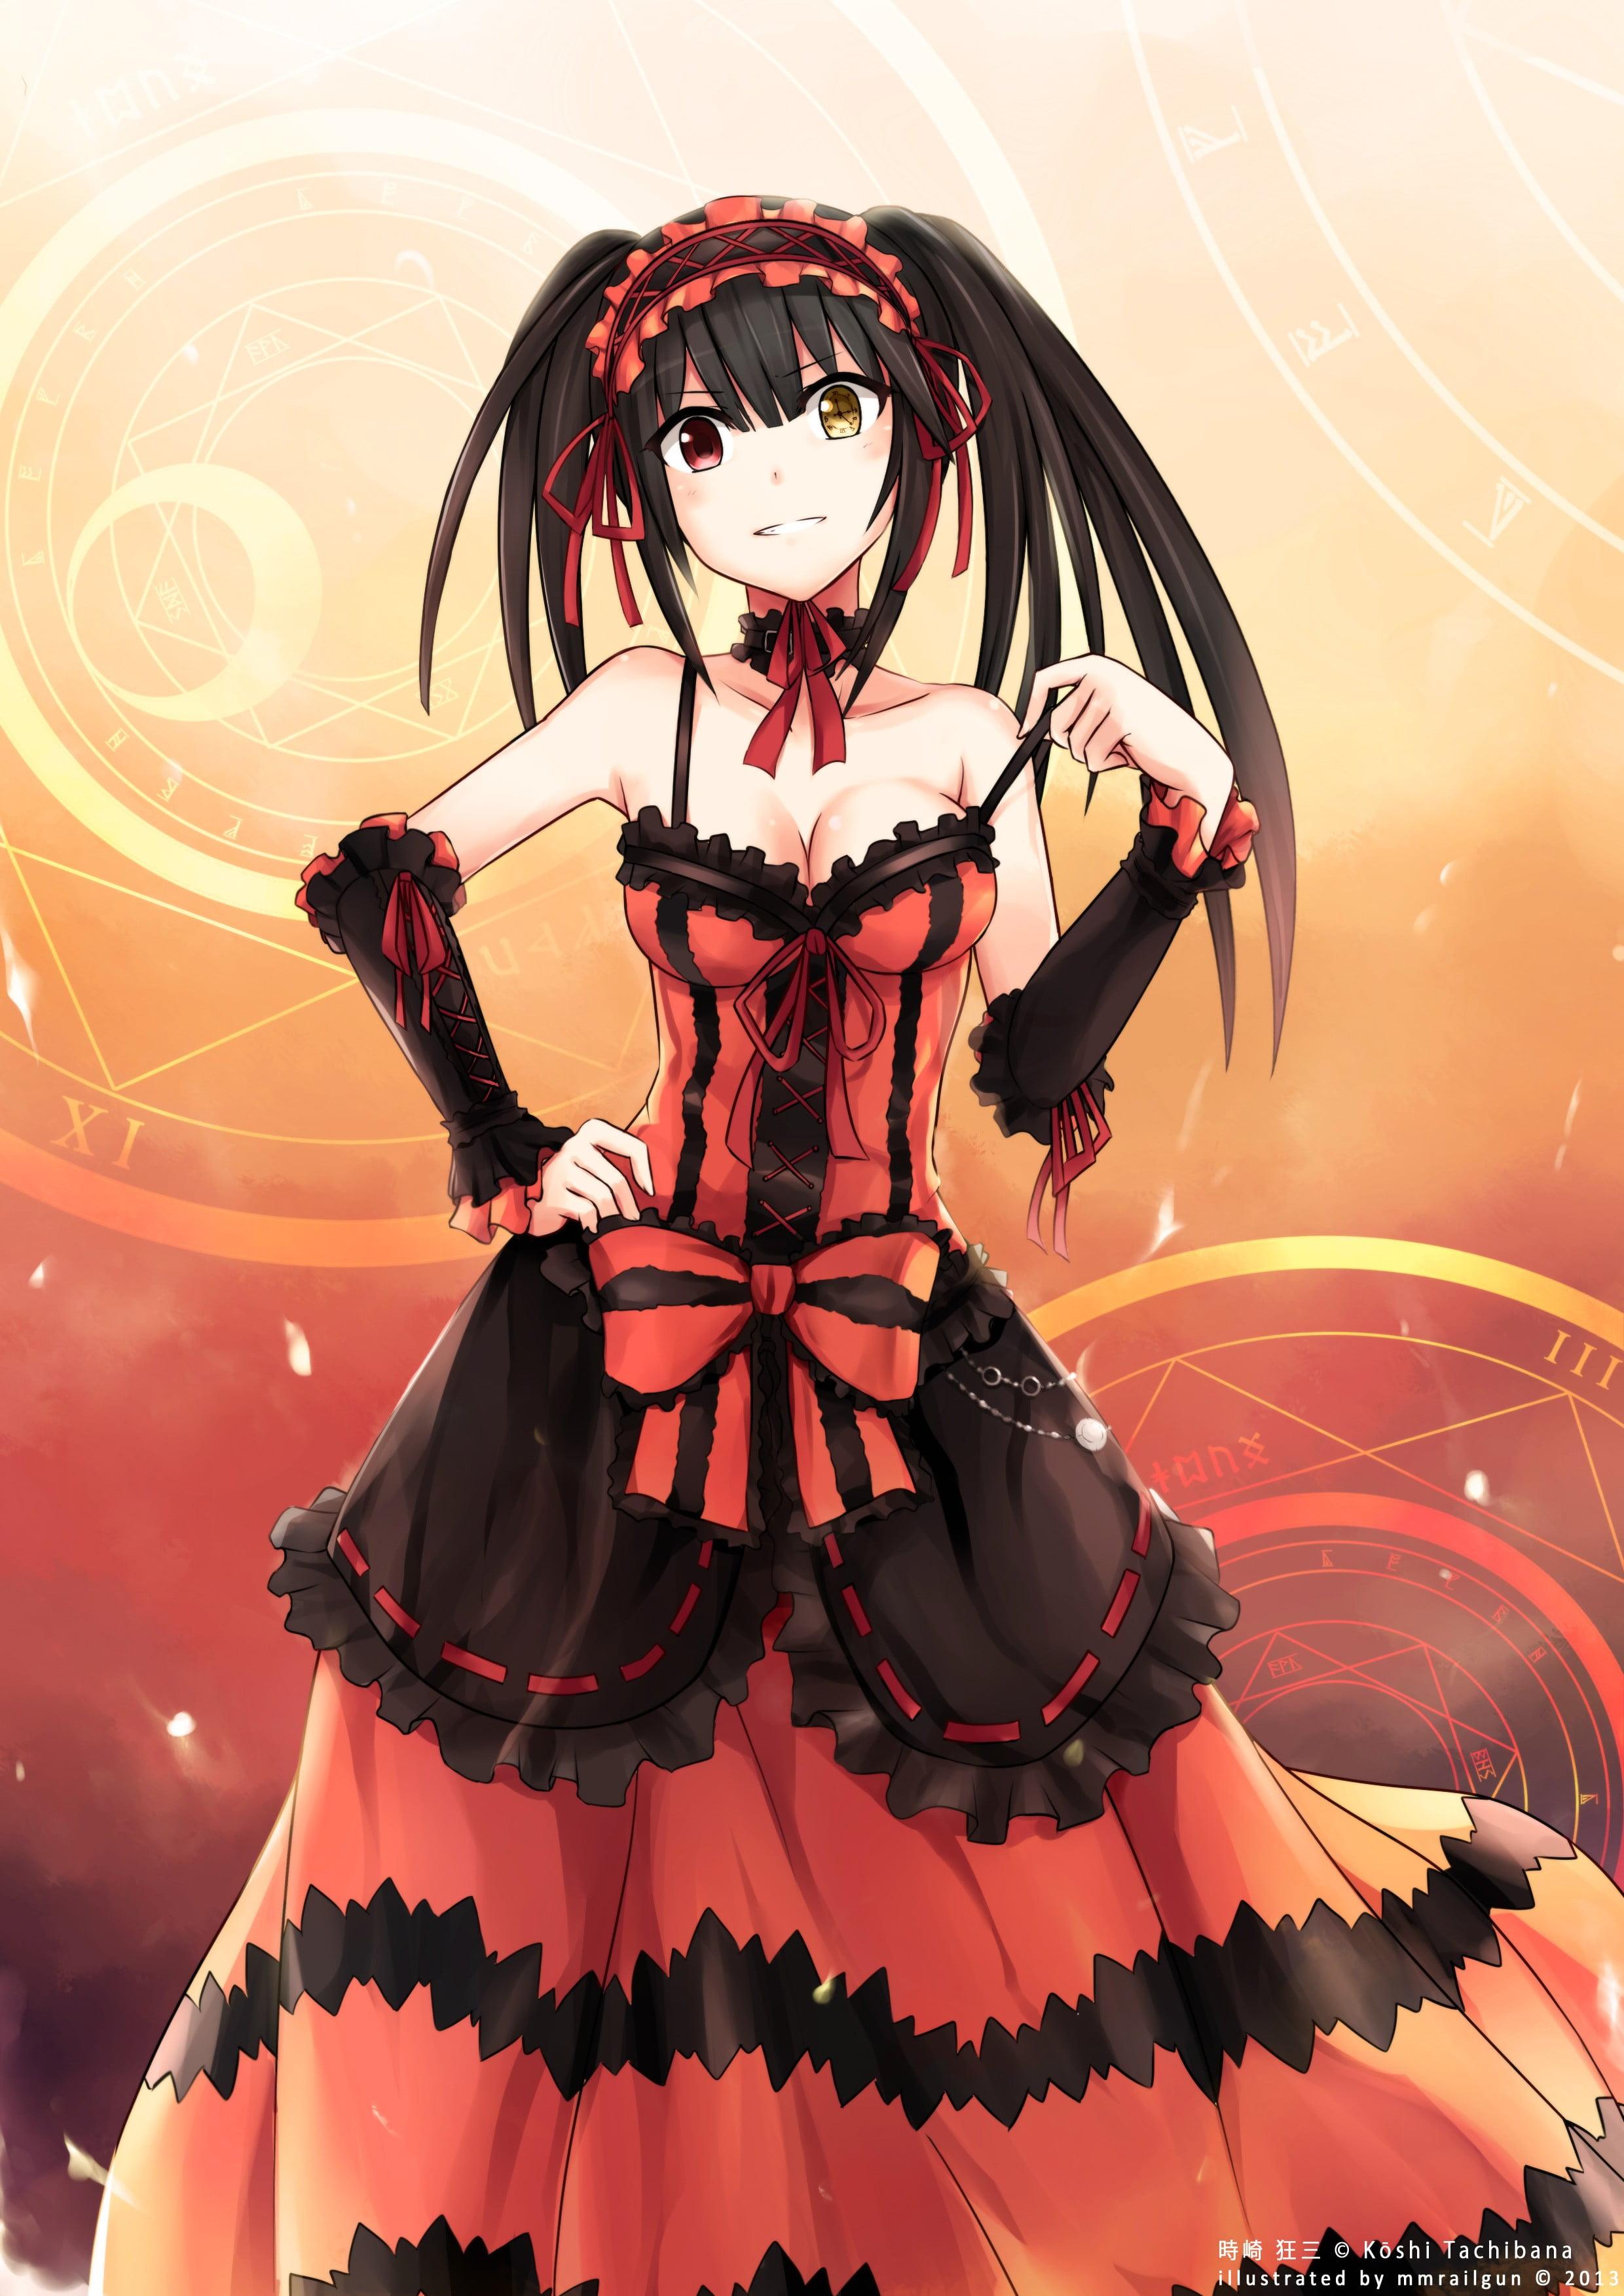 Black haired female anime character illustration, Date A Live